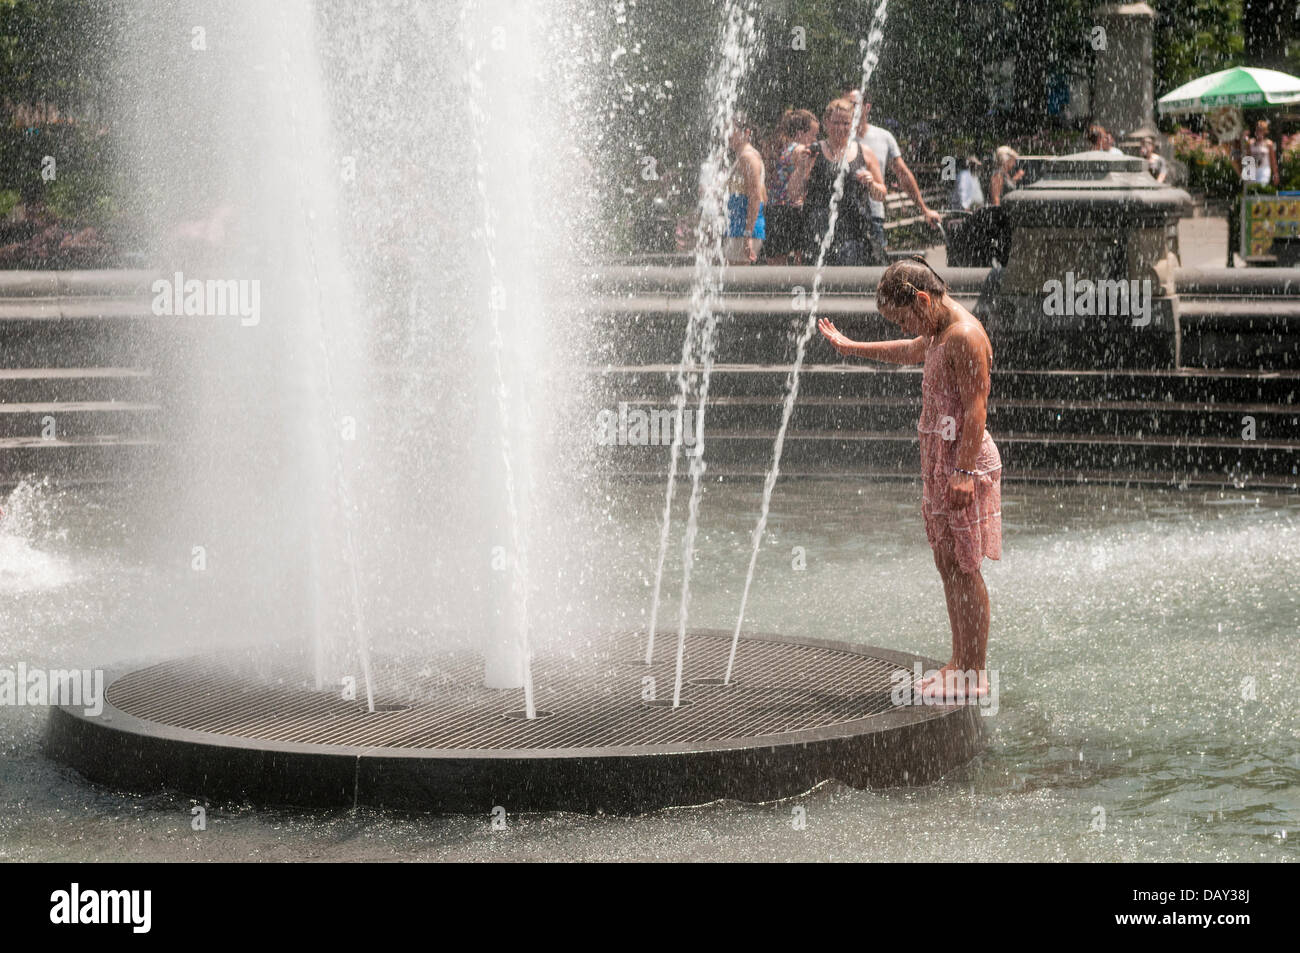 New York, NY 20 July  2013 - Summer heatwave, where temperatures have exceeded 90º farenheit, ( 33º Centigrade ) for the past week, a young girl cools off in the fountain in Washington Square Park.   On Thursday, electricity usage fell just short of an all-time high - 13,161 megawatts were used by 5 p.m., just 28 megawats fewer than a record set on July 22, 2011, Con Edison said, which lead to power outages on Staten Island. City officials urged New Yorkers to avoid exercising outdoors, drink plenty of water and check on any elderly neighbors. Stock Photo